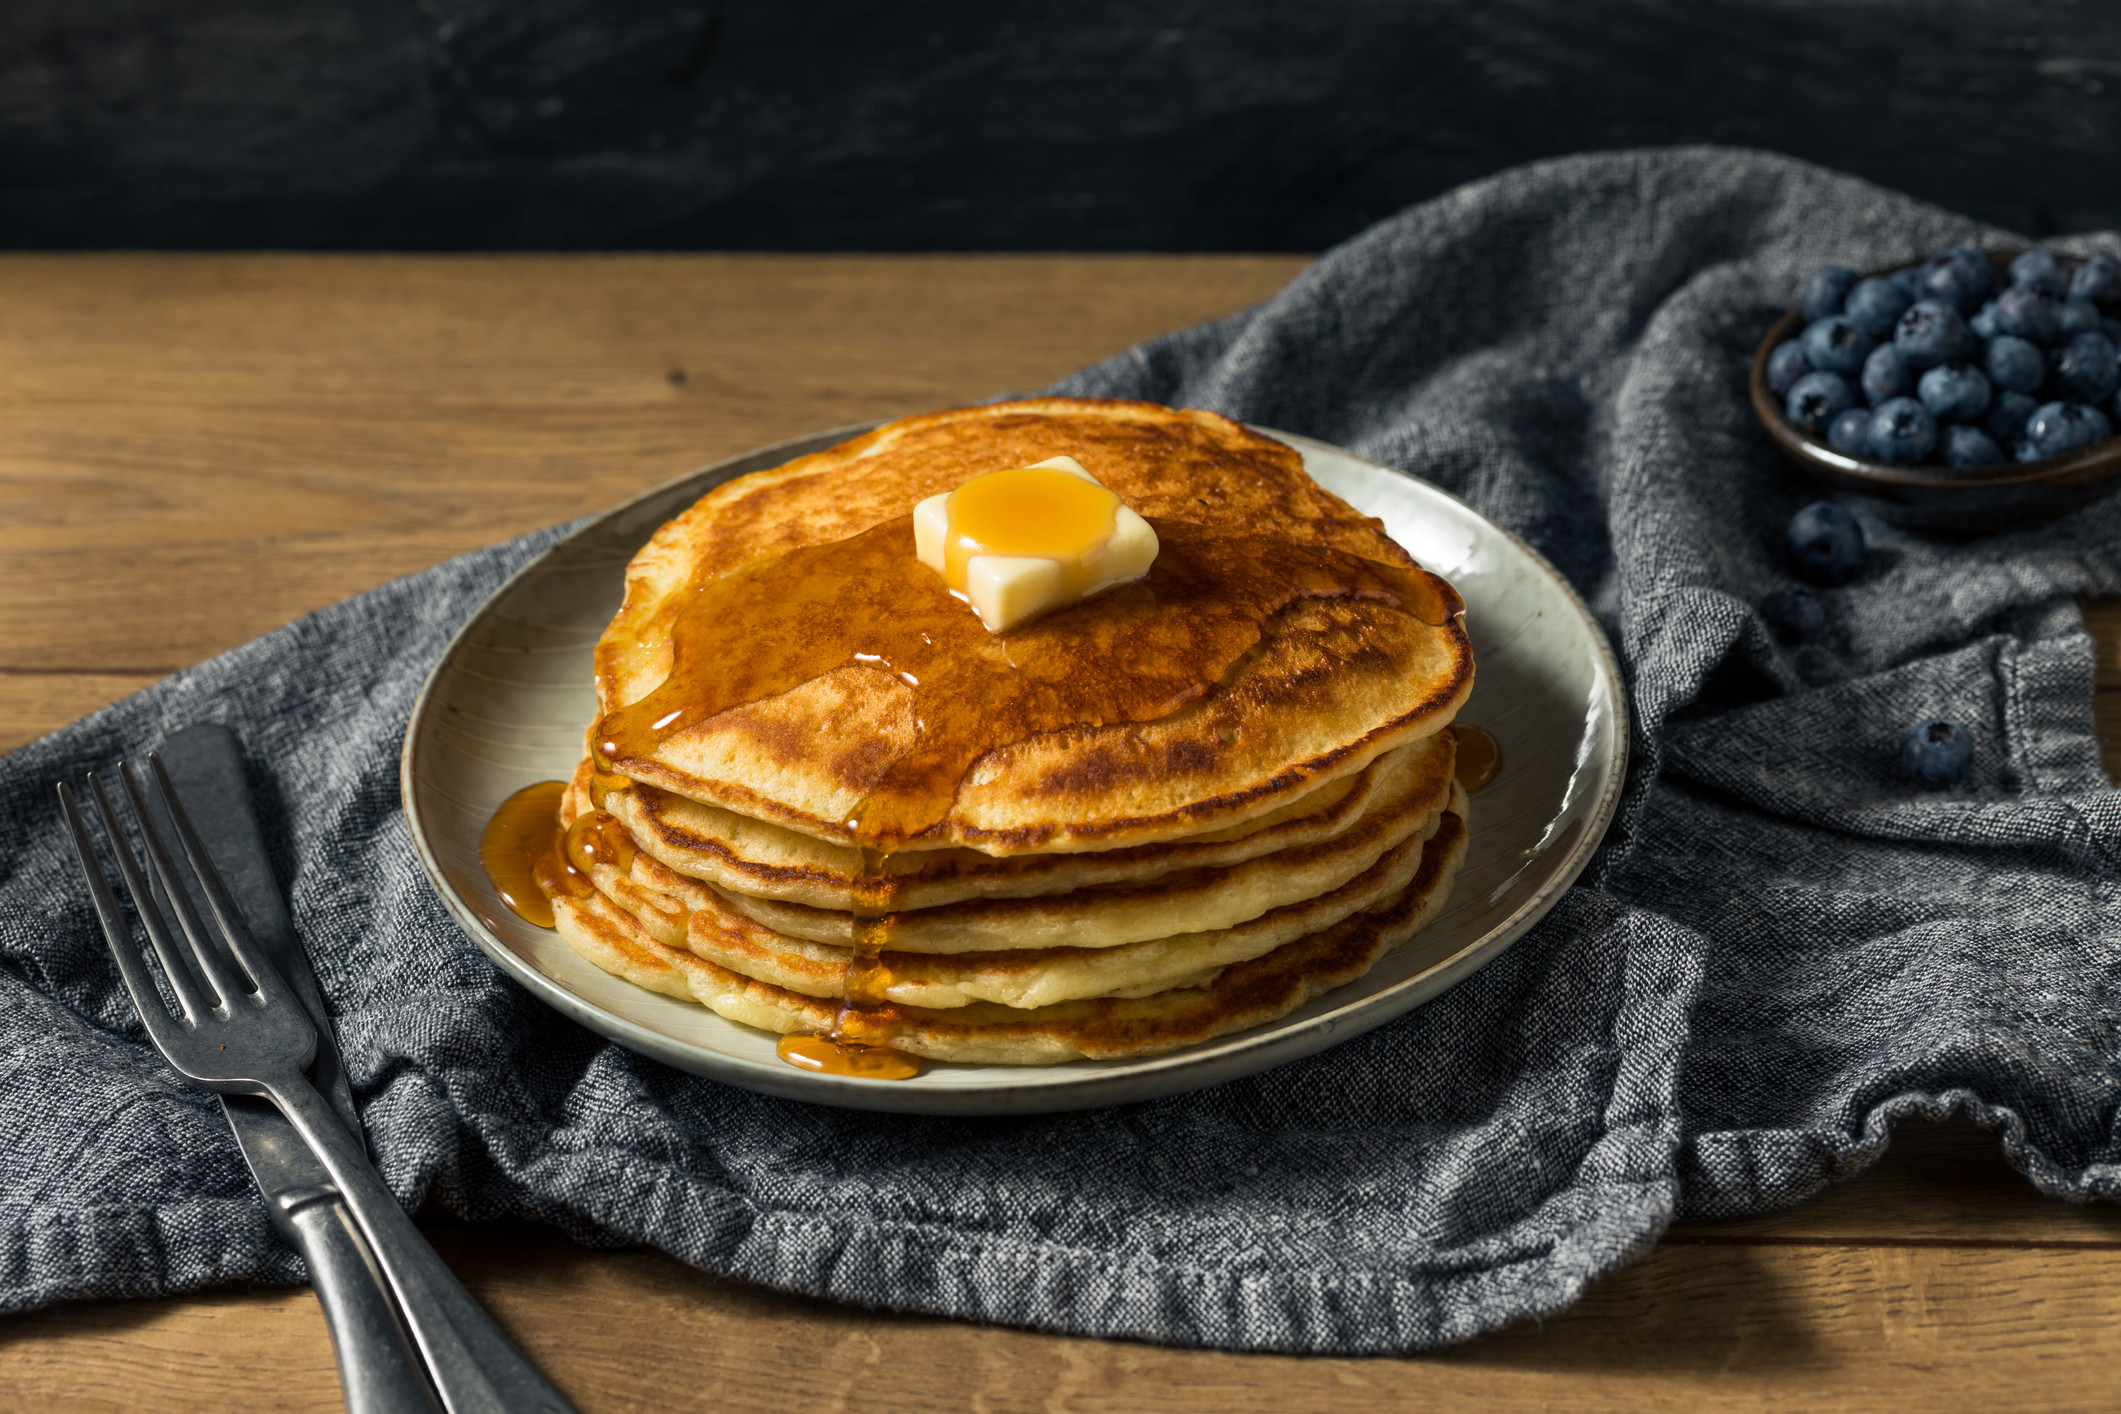 Tips and tricks for making the best pancakes